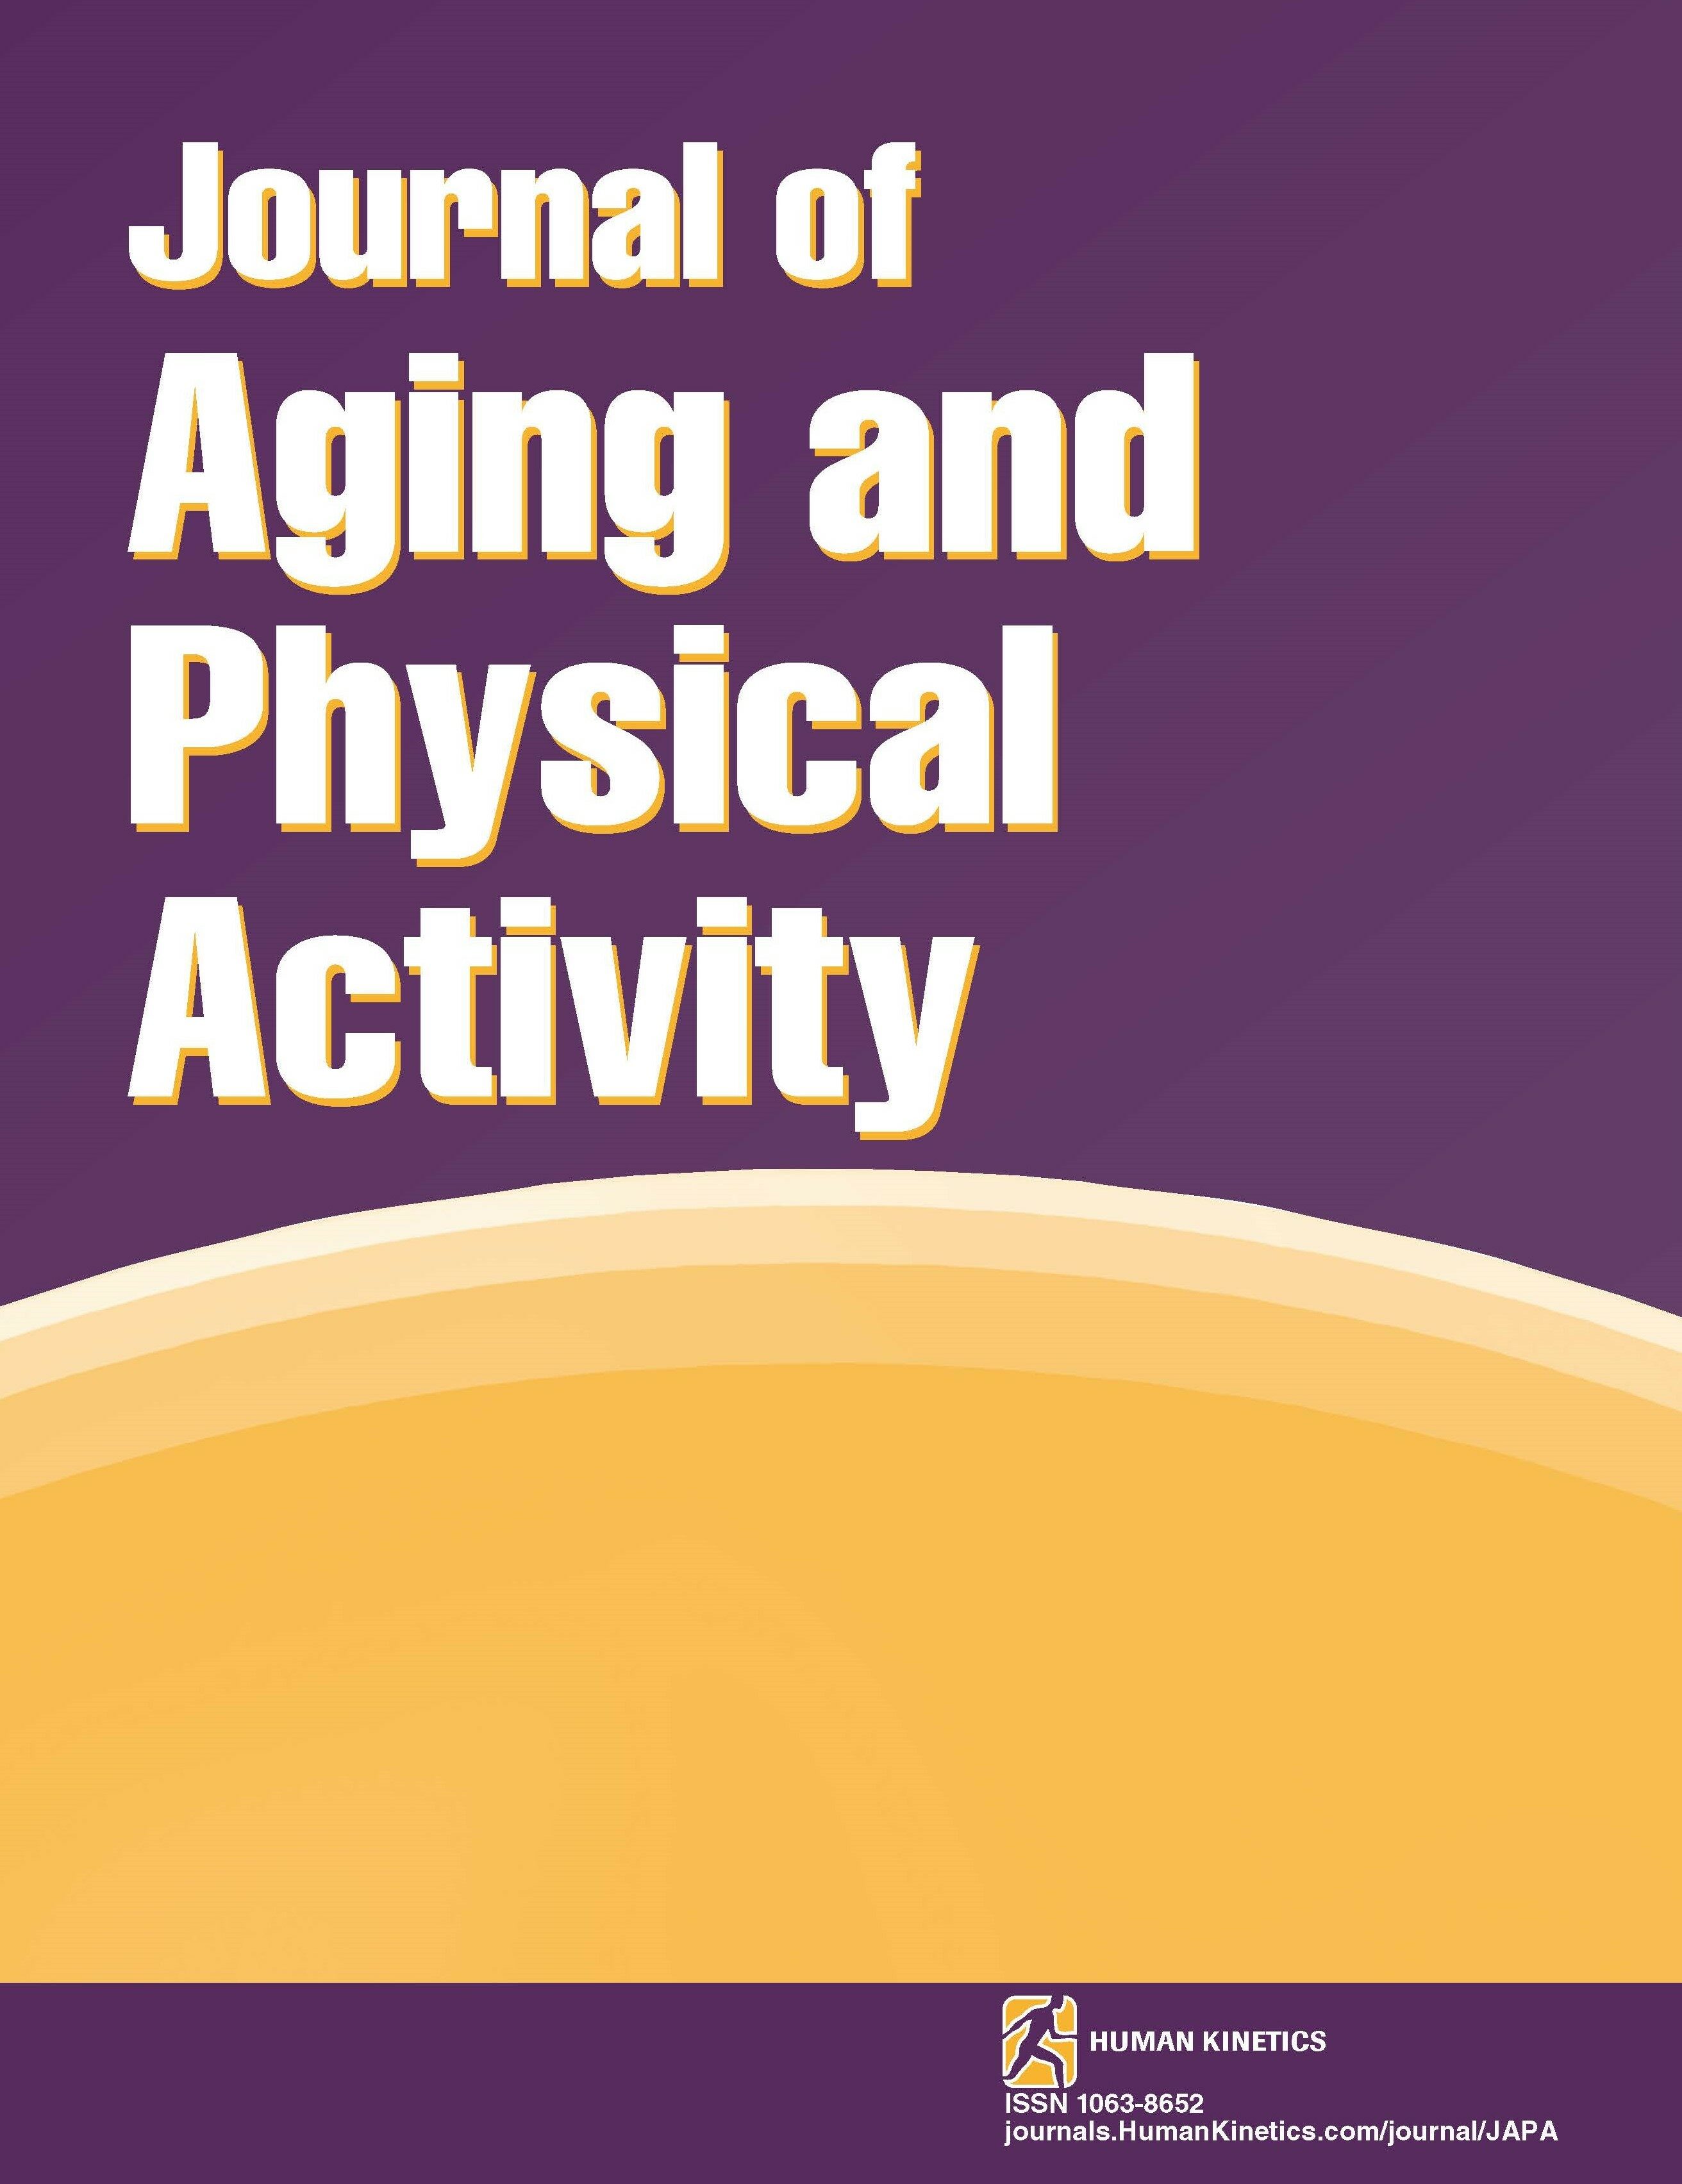 What Is Known From the Published Literature About Yoga Interventions Delivered in Community Settings for Older Adults? A Systematic Scoping Review